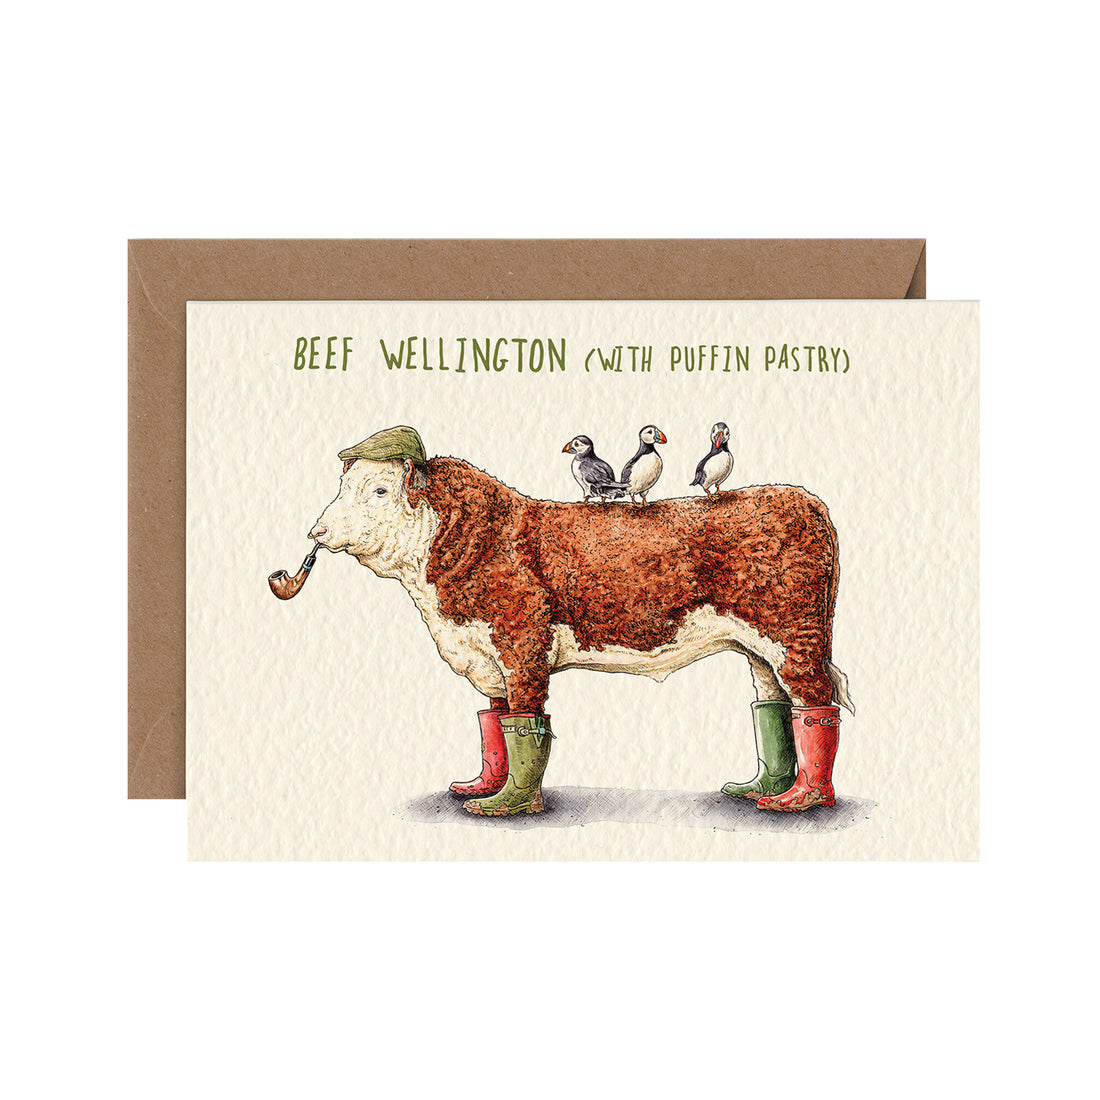 A Hester &amp; Cook Beef Wellington Card, with an illustration of a cow and a bird on it, perfect for cow lovers.